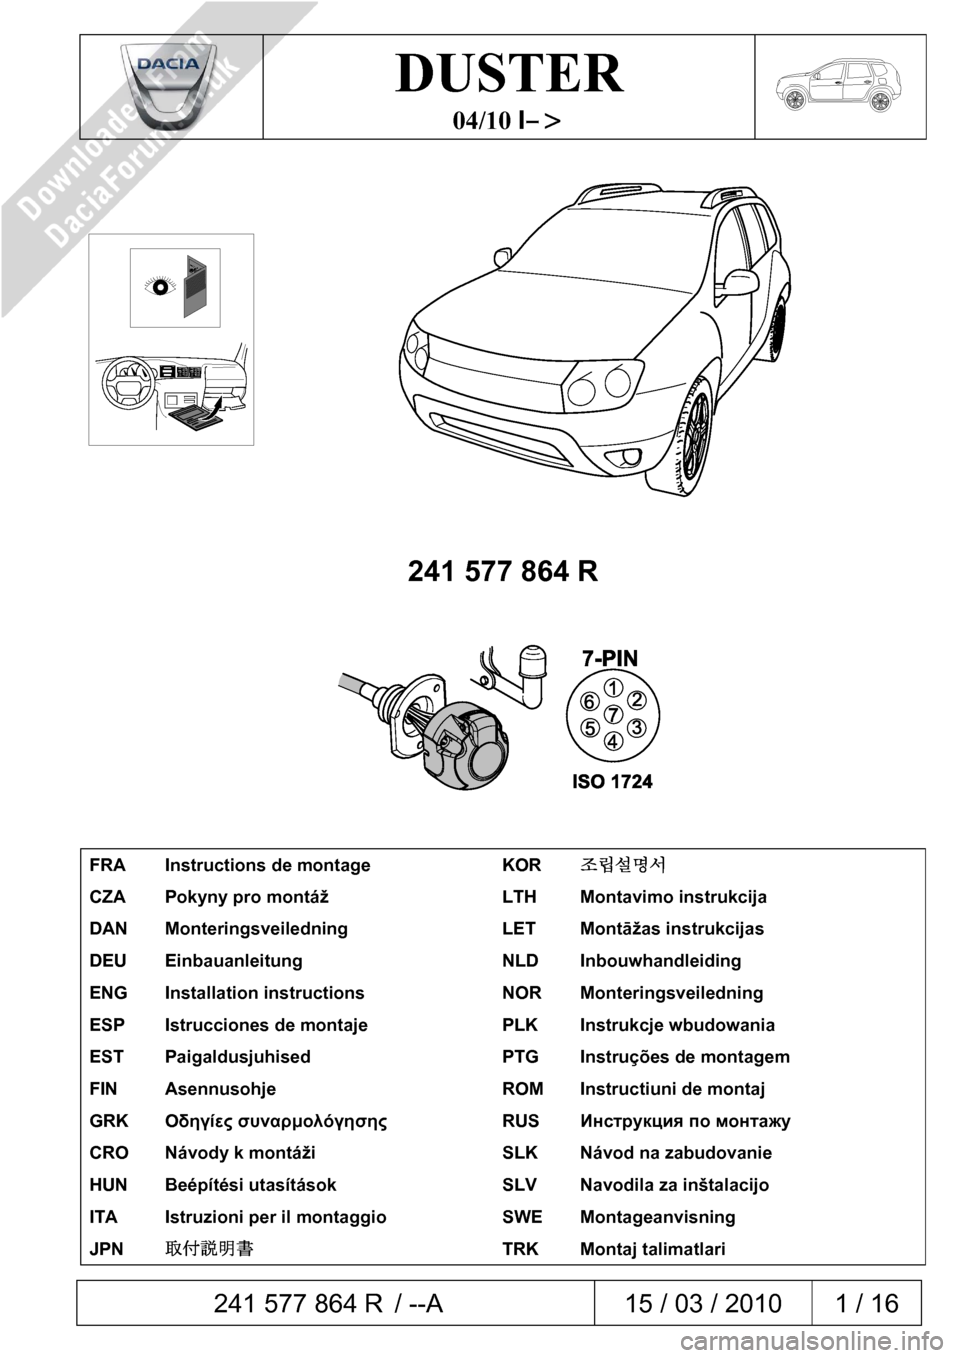 DACIA DUSTER 2010 1.G 7 Pin Towbar Fitting Guide Workshop Manual  241 577 864 R / --A  15 / 03 / 2010  1 / 16  
 
DUSTER 
04/10 I–> 
 
 
 
 
241 577 864 R 
 
 
 
FRA  Instructions de montage  KOR 조립설명서 
CZA  Pokyny pro montáž  LTH  Montavimo instrukci